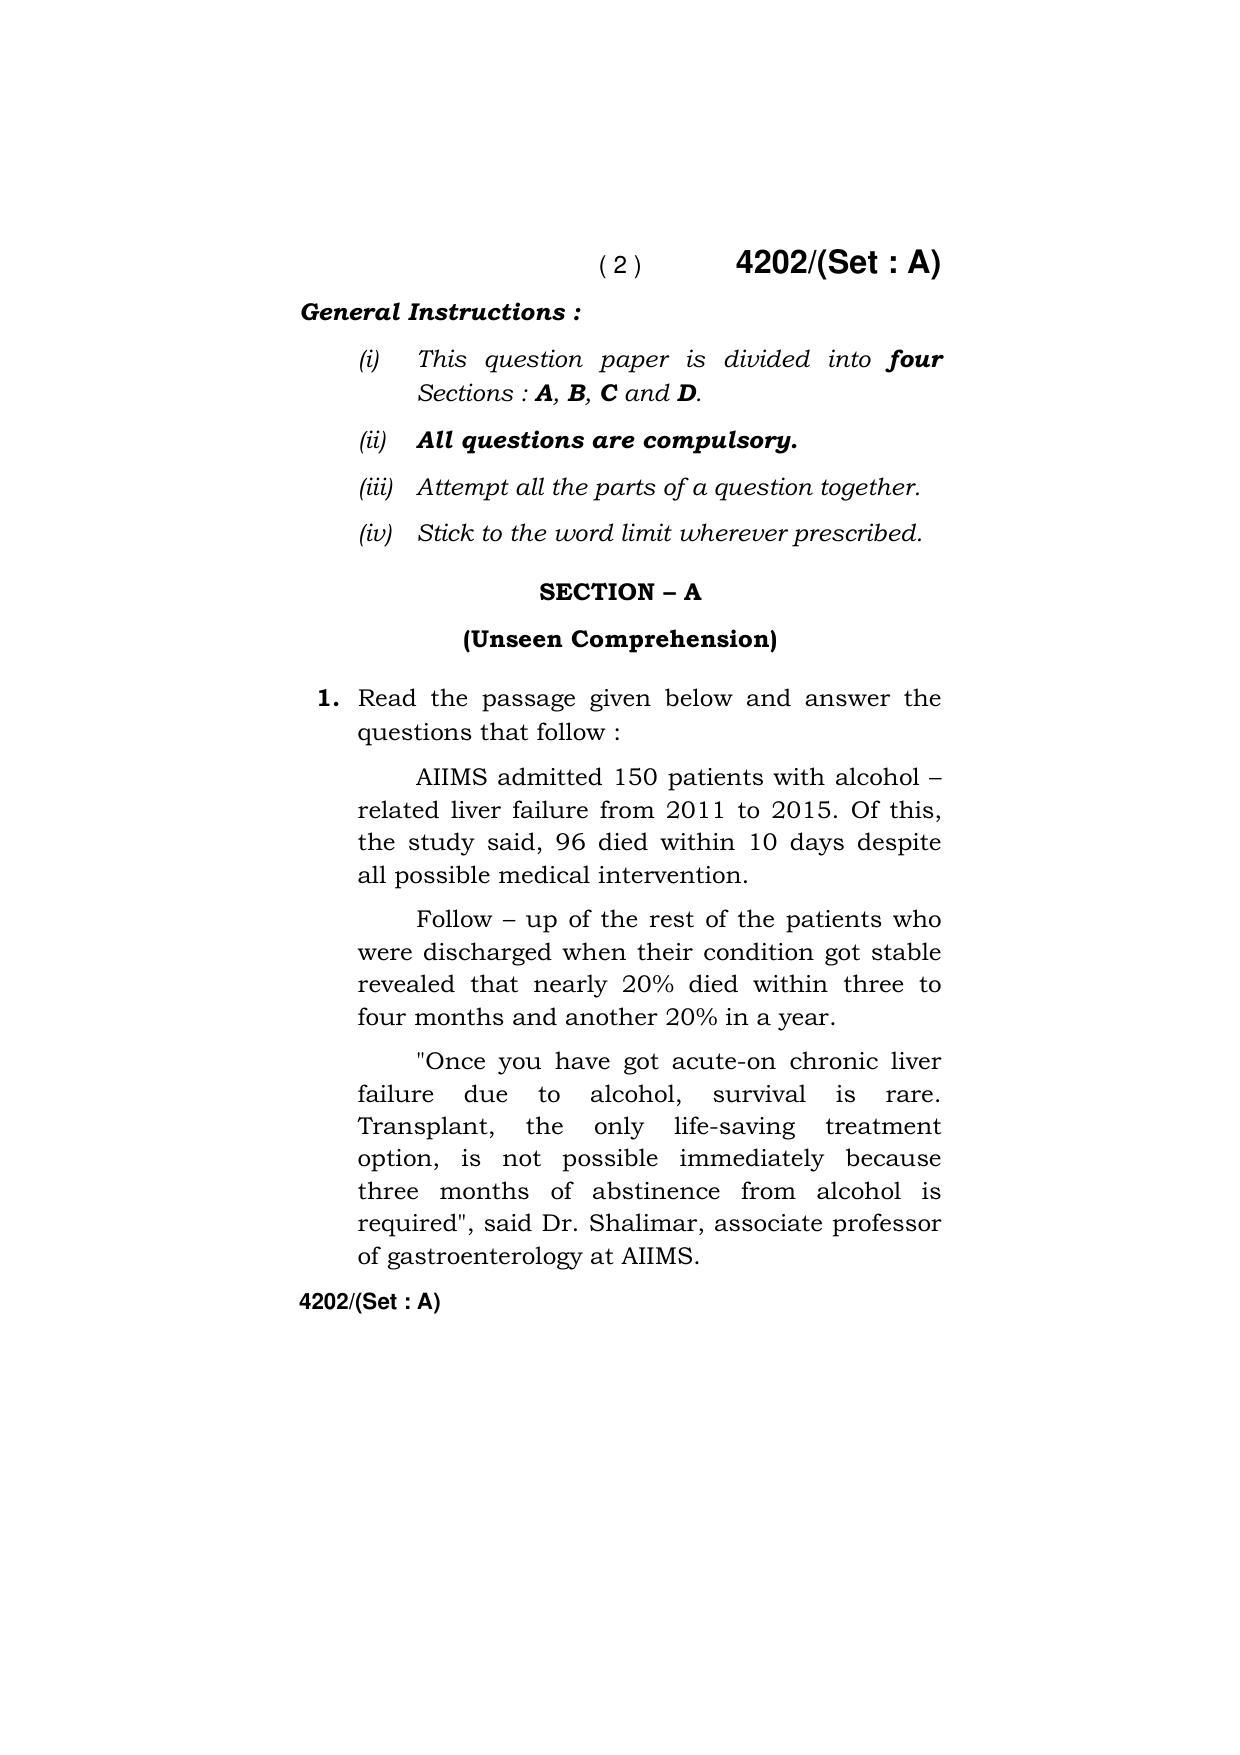 Haryana Board HBSE Class 10 English (All Set) 2019 Question Paper - Page 2